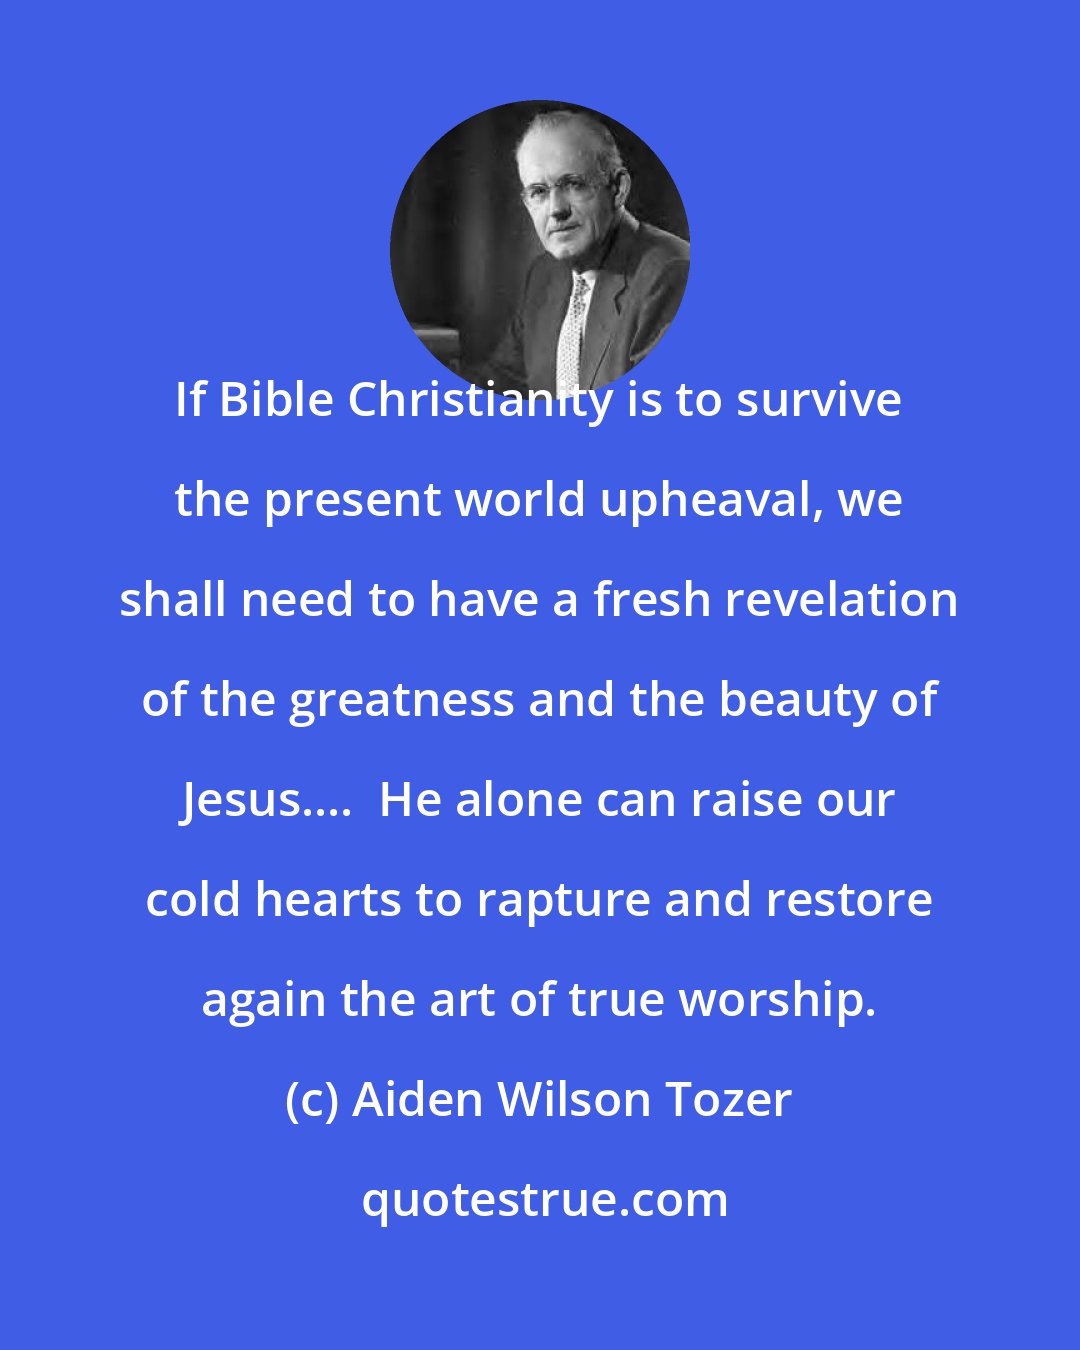 Aiden Wilson Tozer: If Bible Christianity is to survive the present world upheaval, we shall need to have a fresh revelation of the greatness and the beauty of Jesus....  He alone can raise our cold hearts to rapture and restore again the art of true worship.